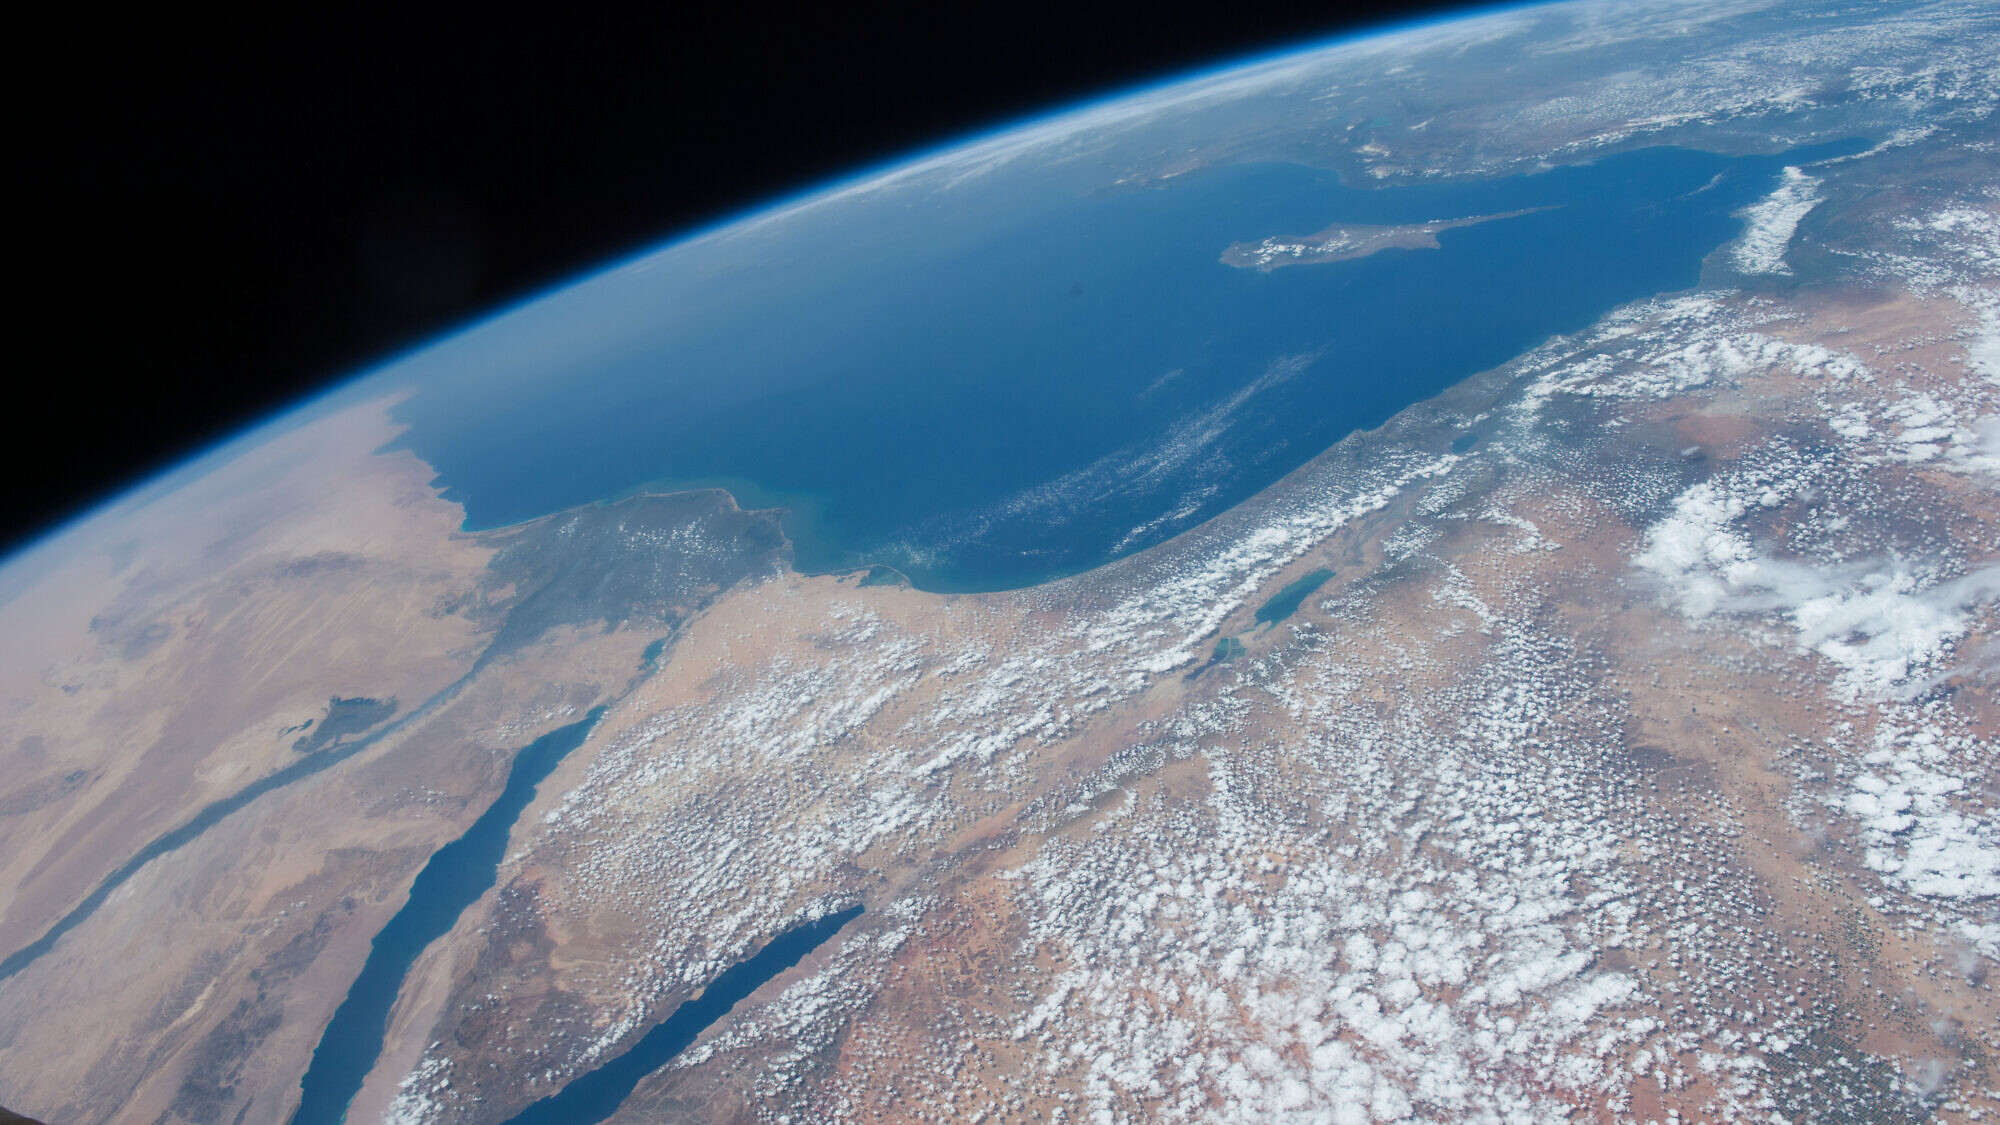 The Middle East as seen from 250 miles above in this photo from the International Space Station. Countries, from left, along the Mediterranean coast include Egypt, Gaza, Saudi Arabia, Israel, Lebanon, Syria and Turkey. The major waterways shown from left to right are the Nile River, Gulf of Suez, Gulf of Aqaba and the Red Sea, April 4, 2016. Credit: NASA on Flickr via Wikimedia Commons.